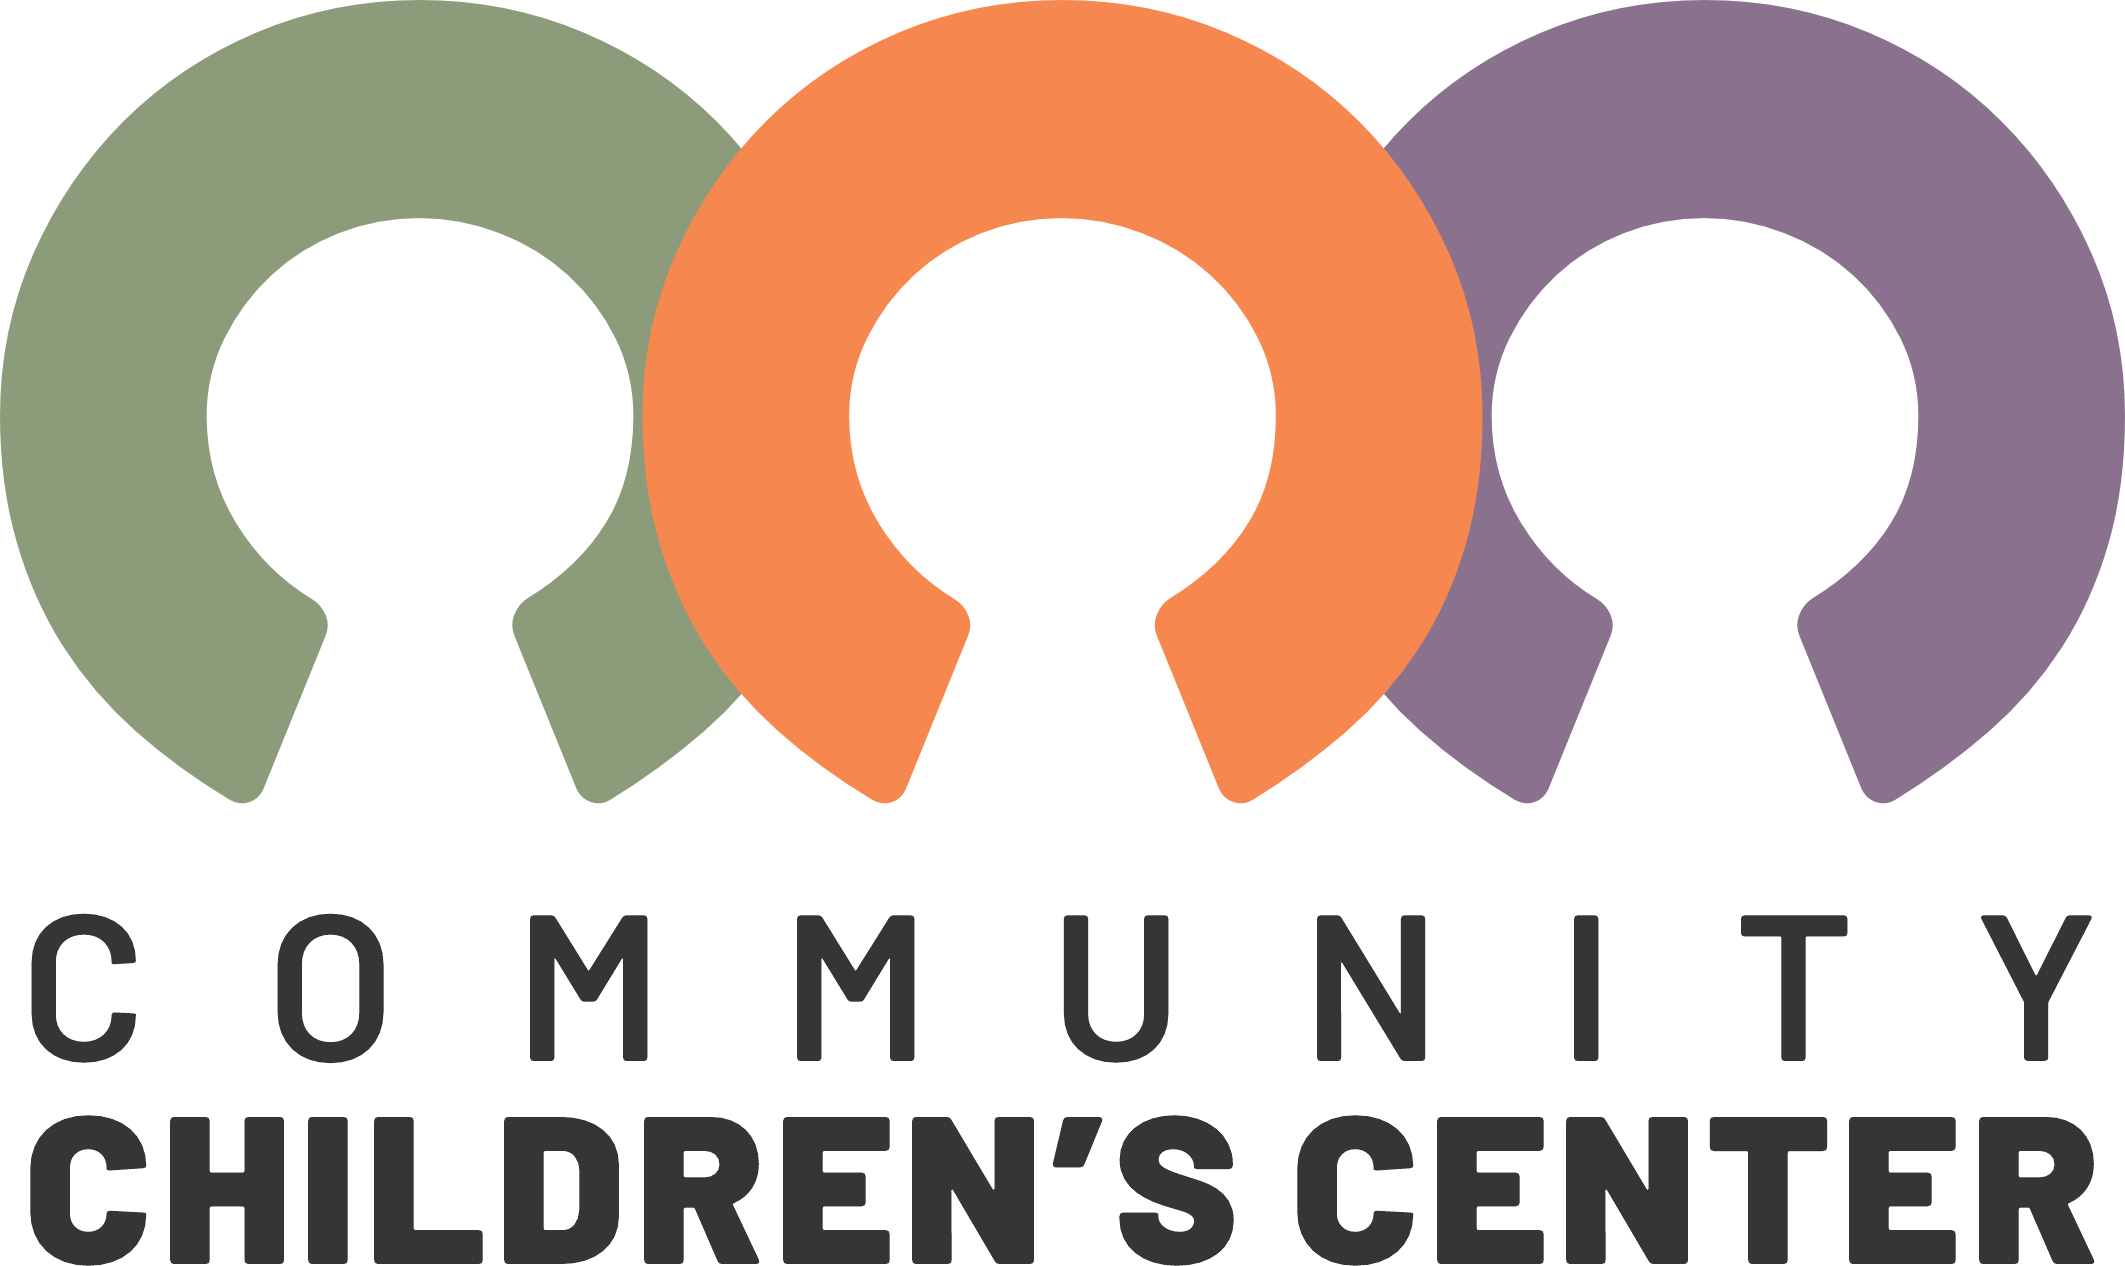 Three C's on their ends with the words "Community Children's Center" underneath